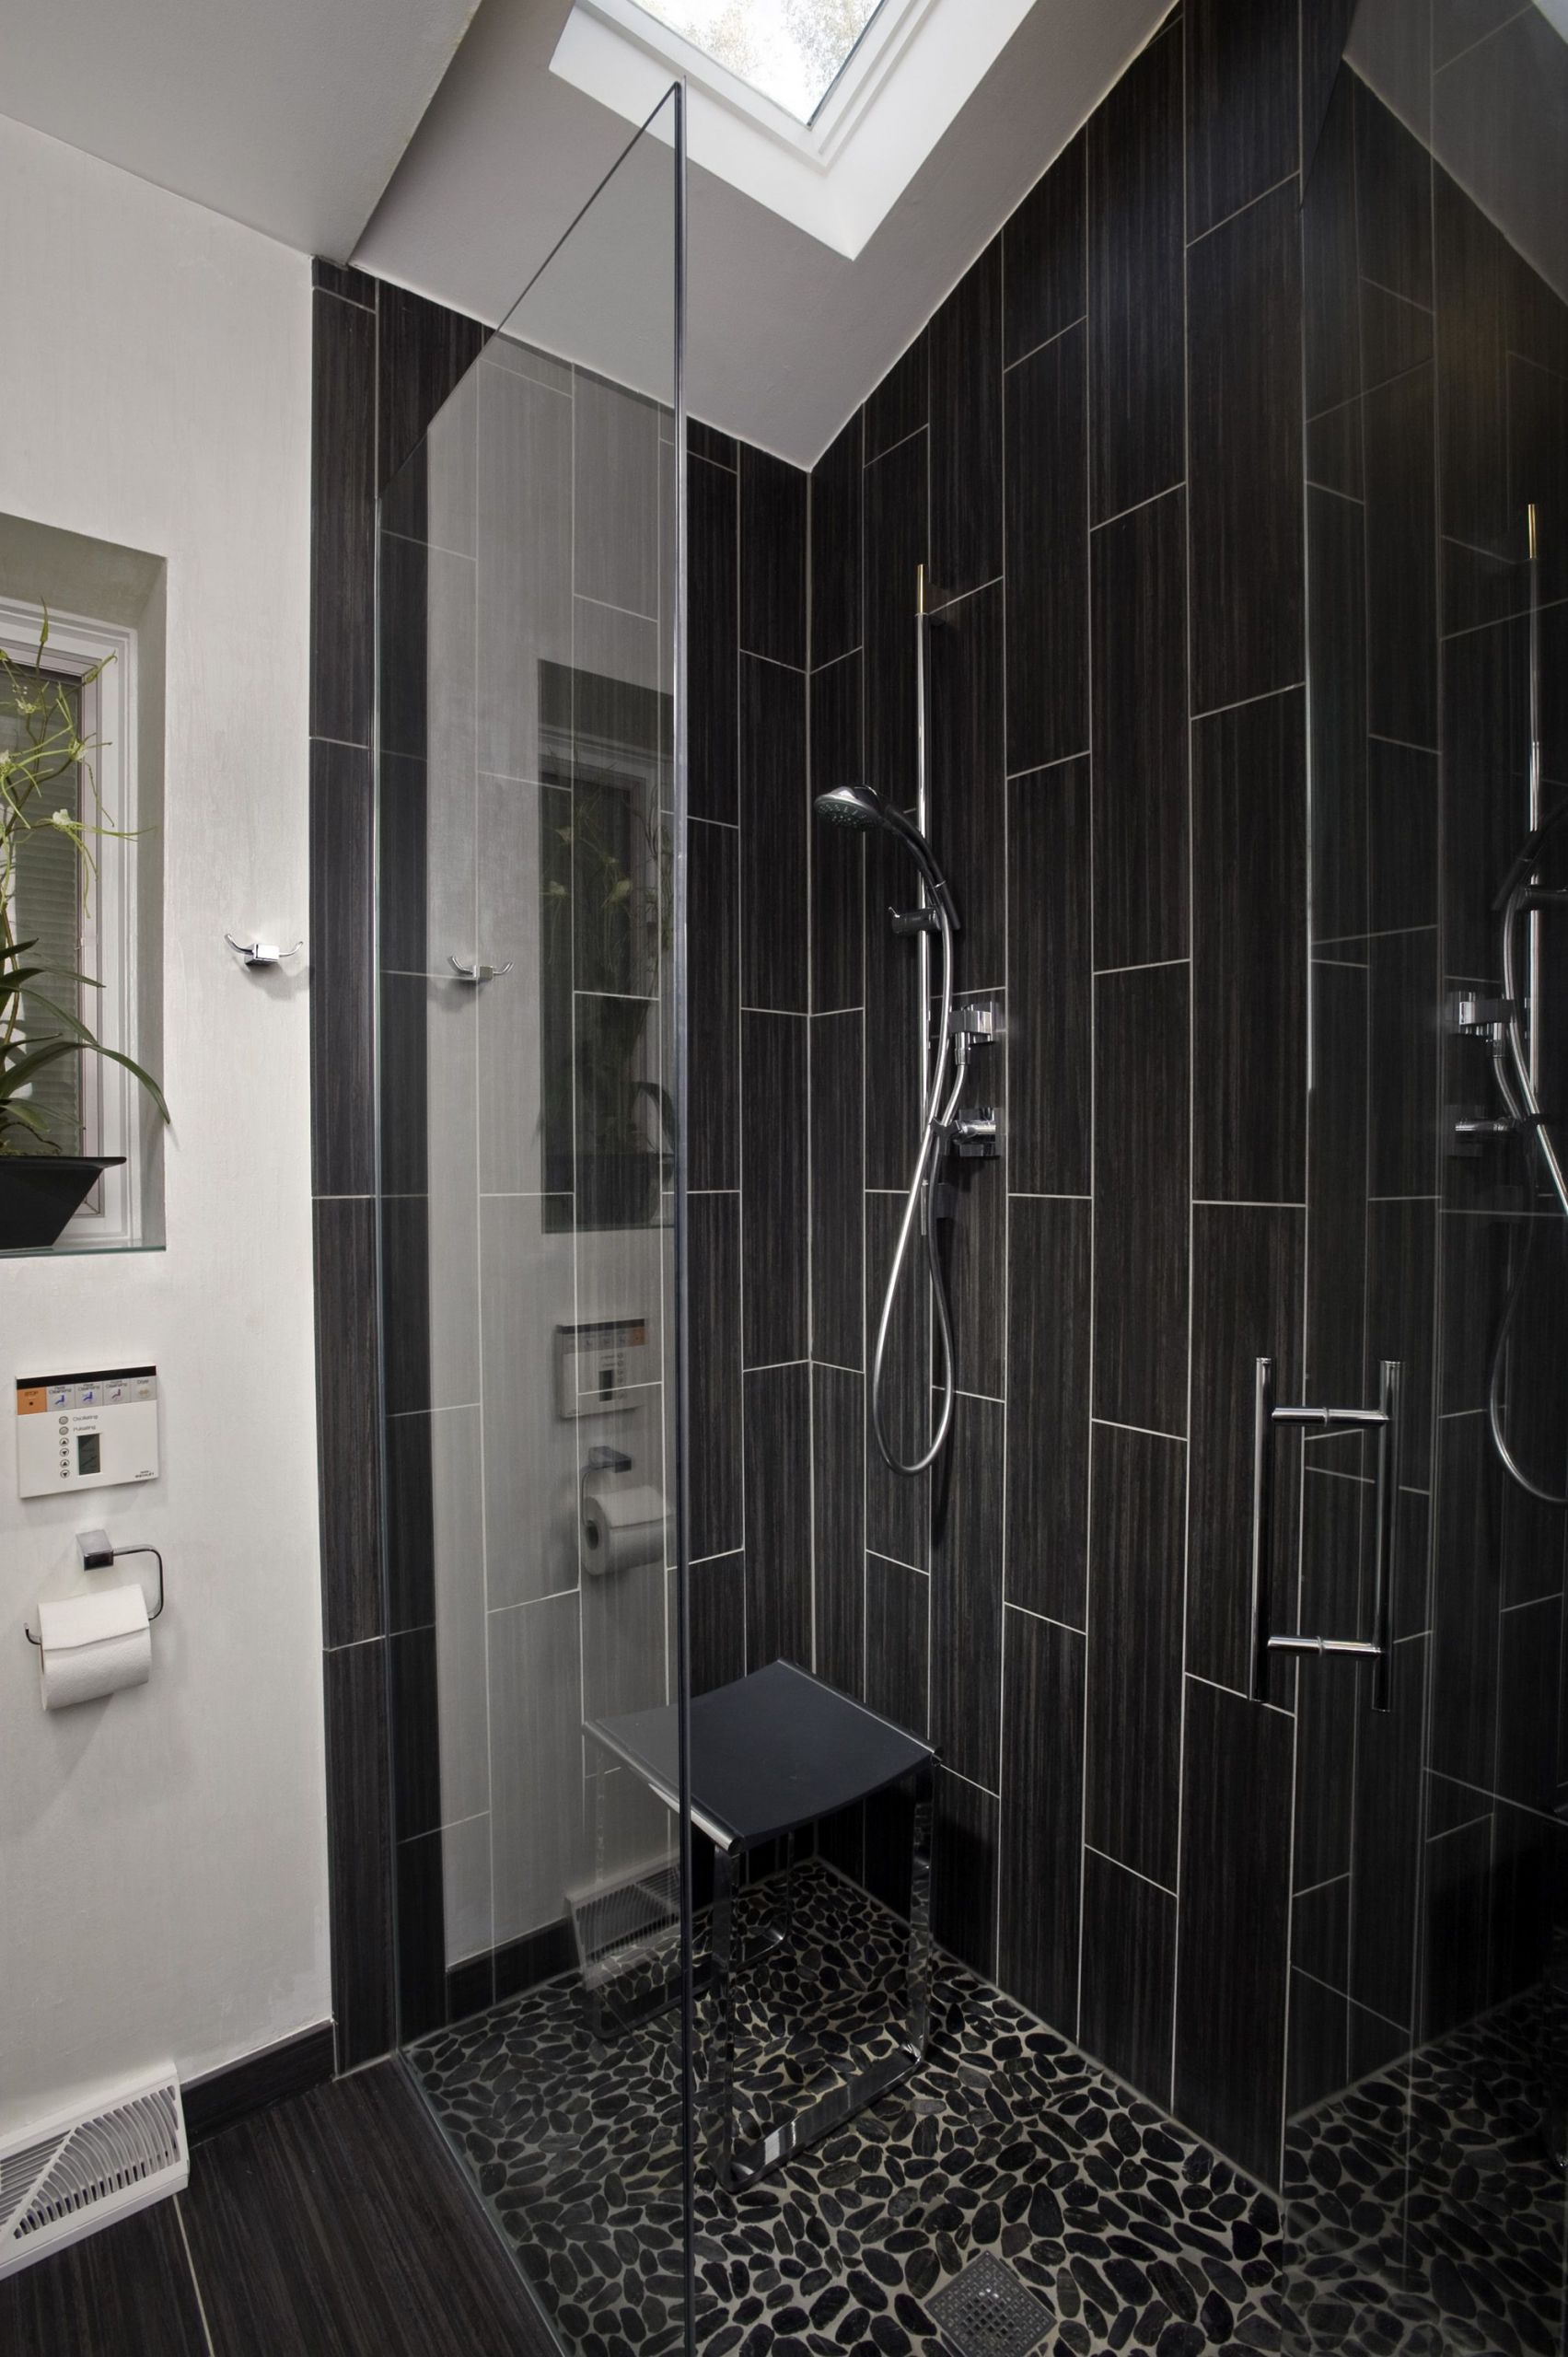 Glass Tile Bathroom Ideas
 Tile Shower Ideas Affecting the Appearance of the Space